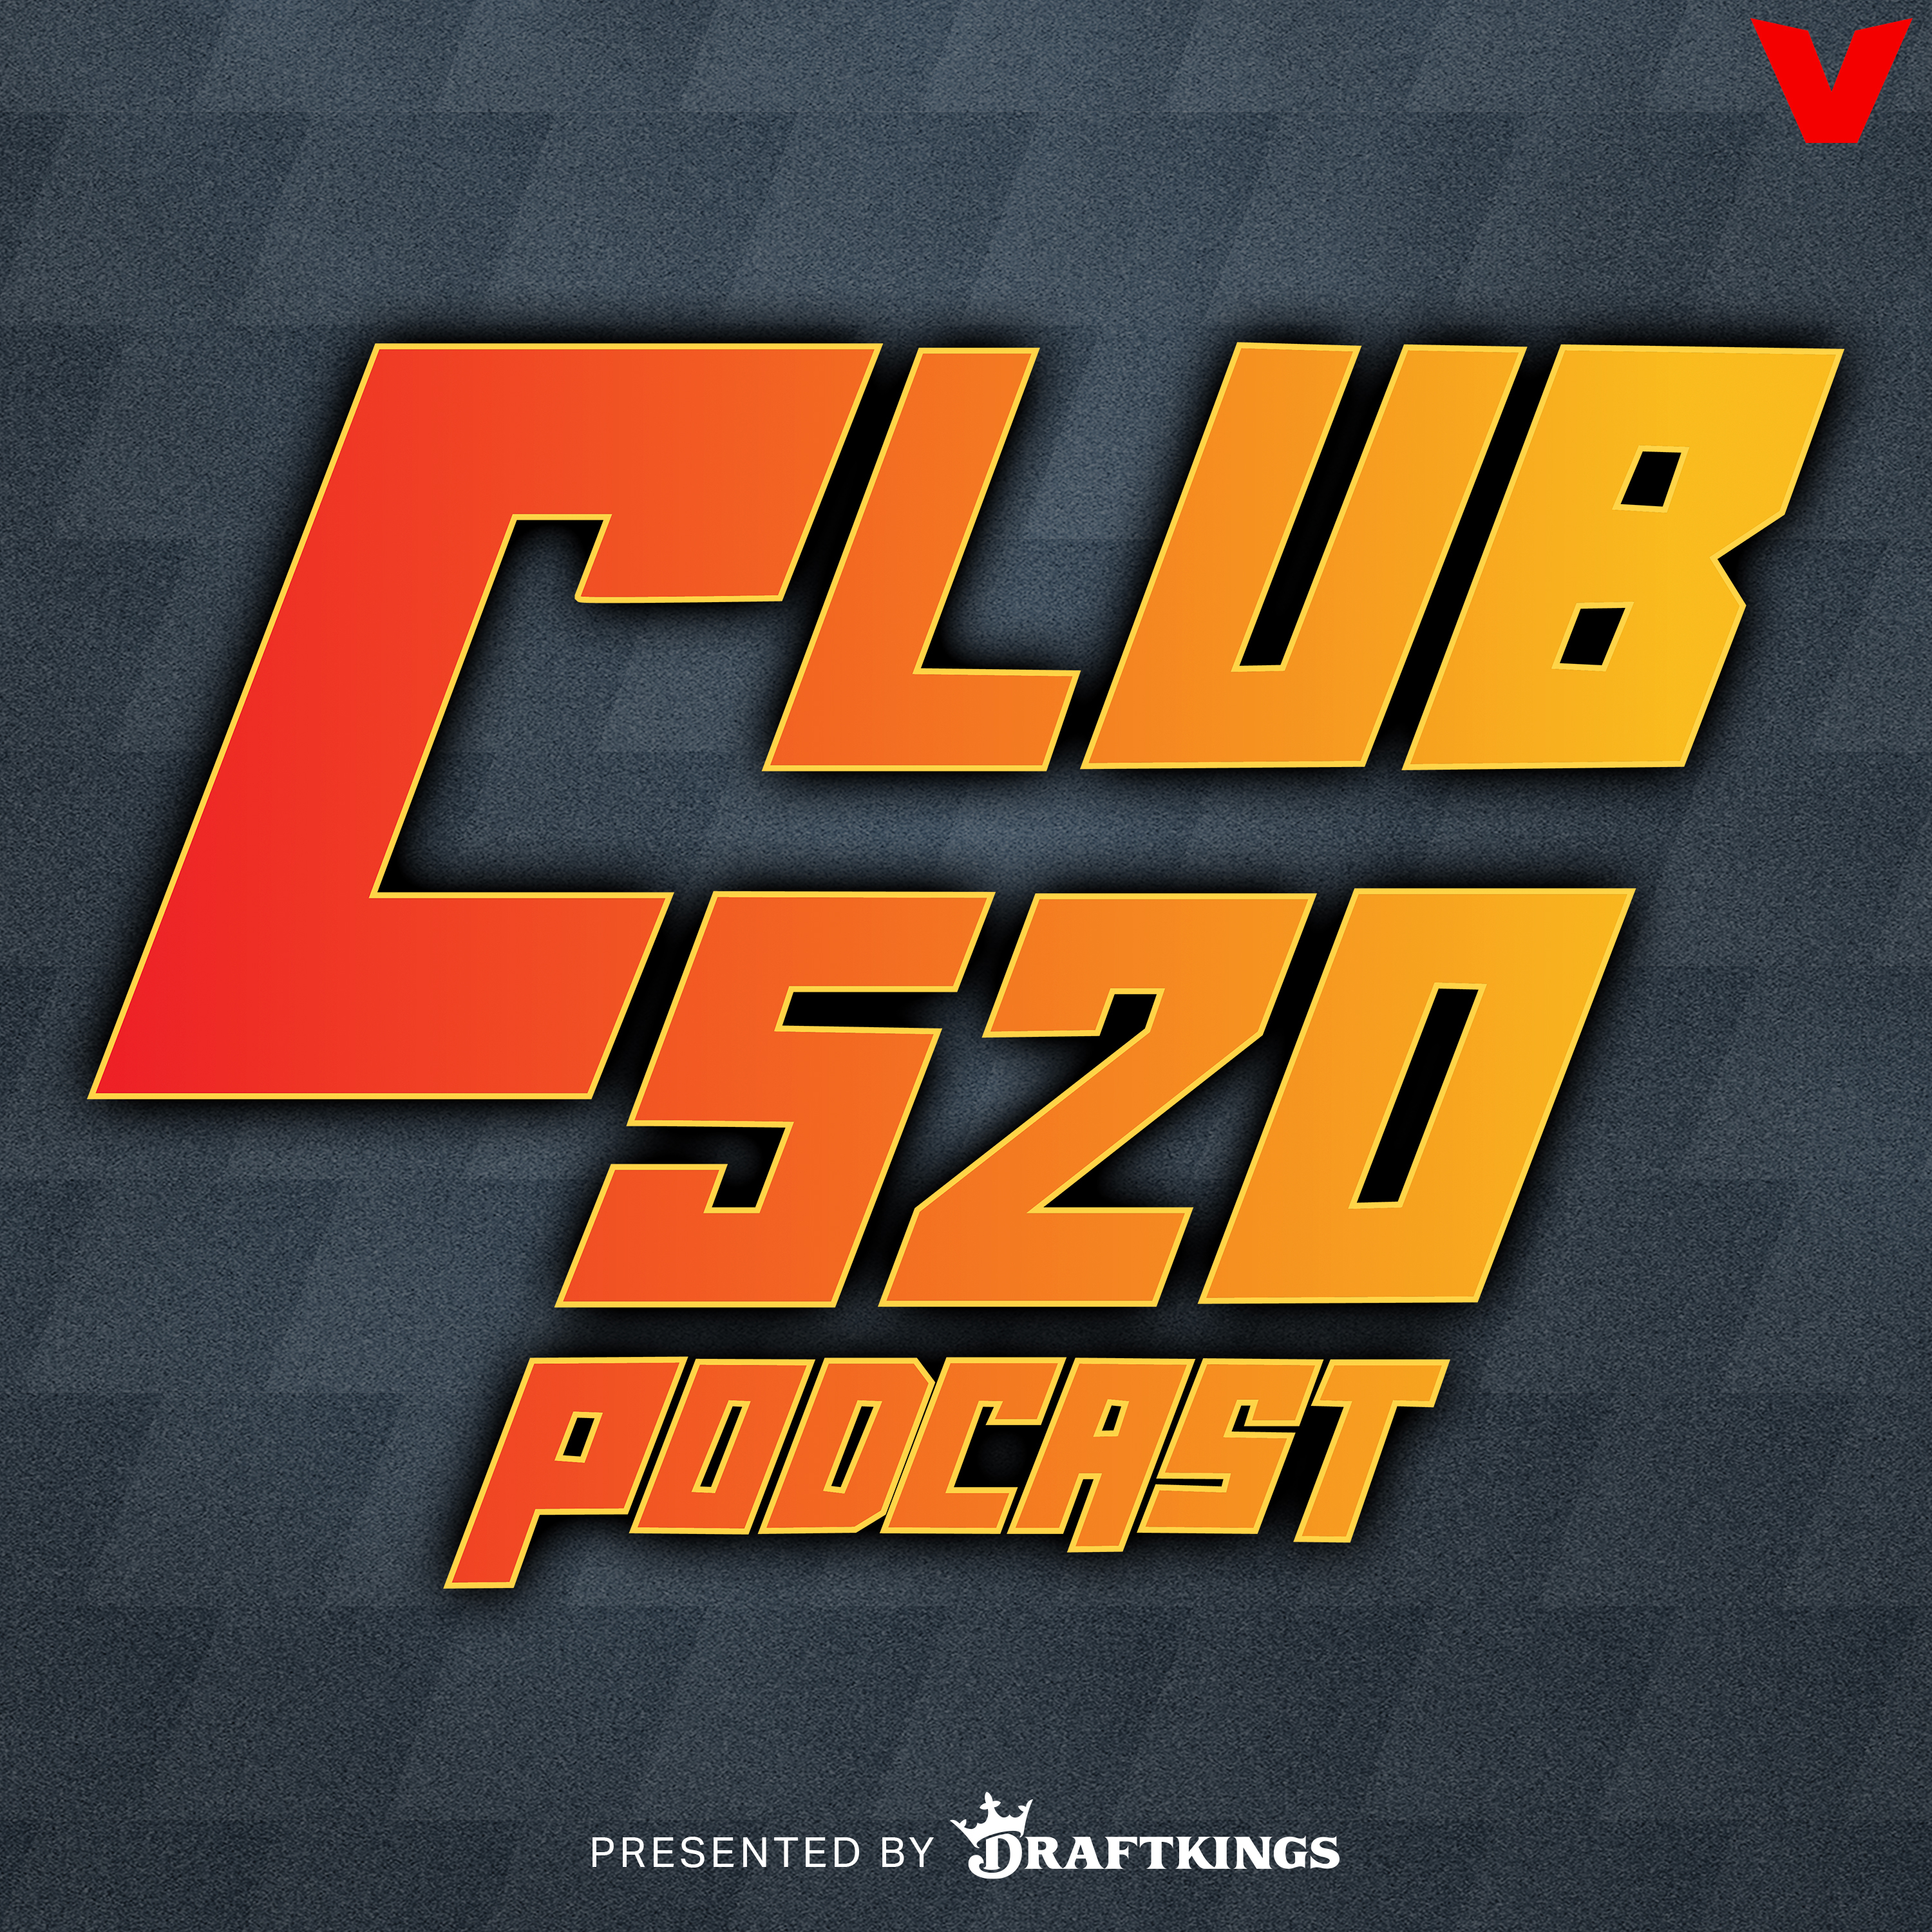 Club 520 - Jeff Teague says Suns are COOKED, reacts to Pacers-Bucks, Brunson vs. Haliburton by iHeartPodcasts and The Volume